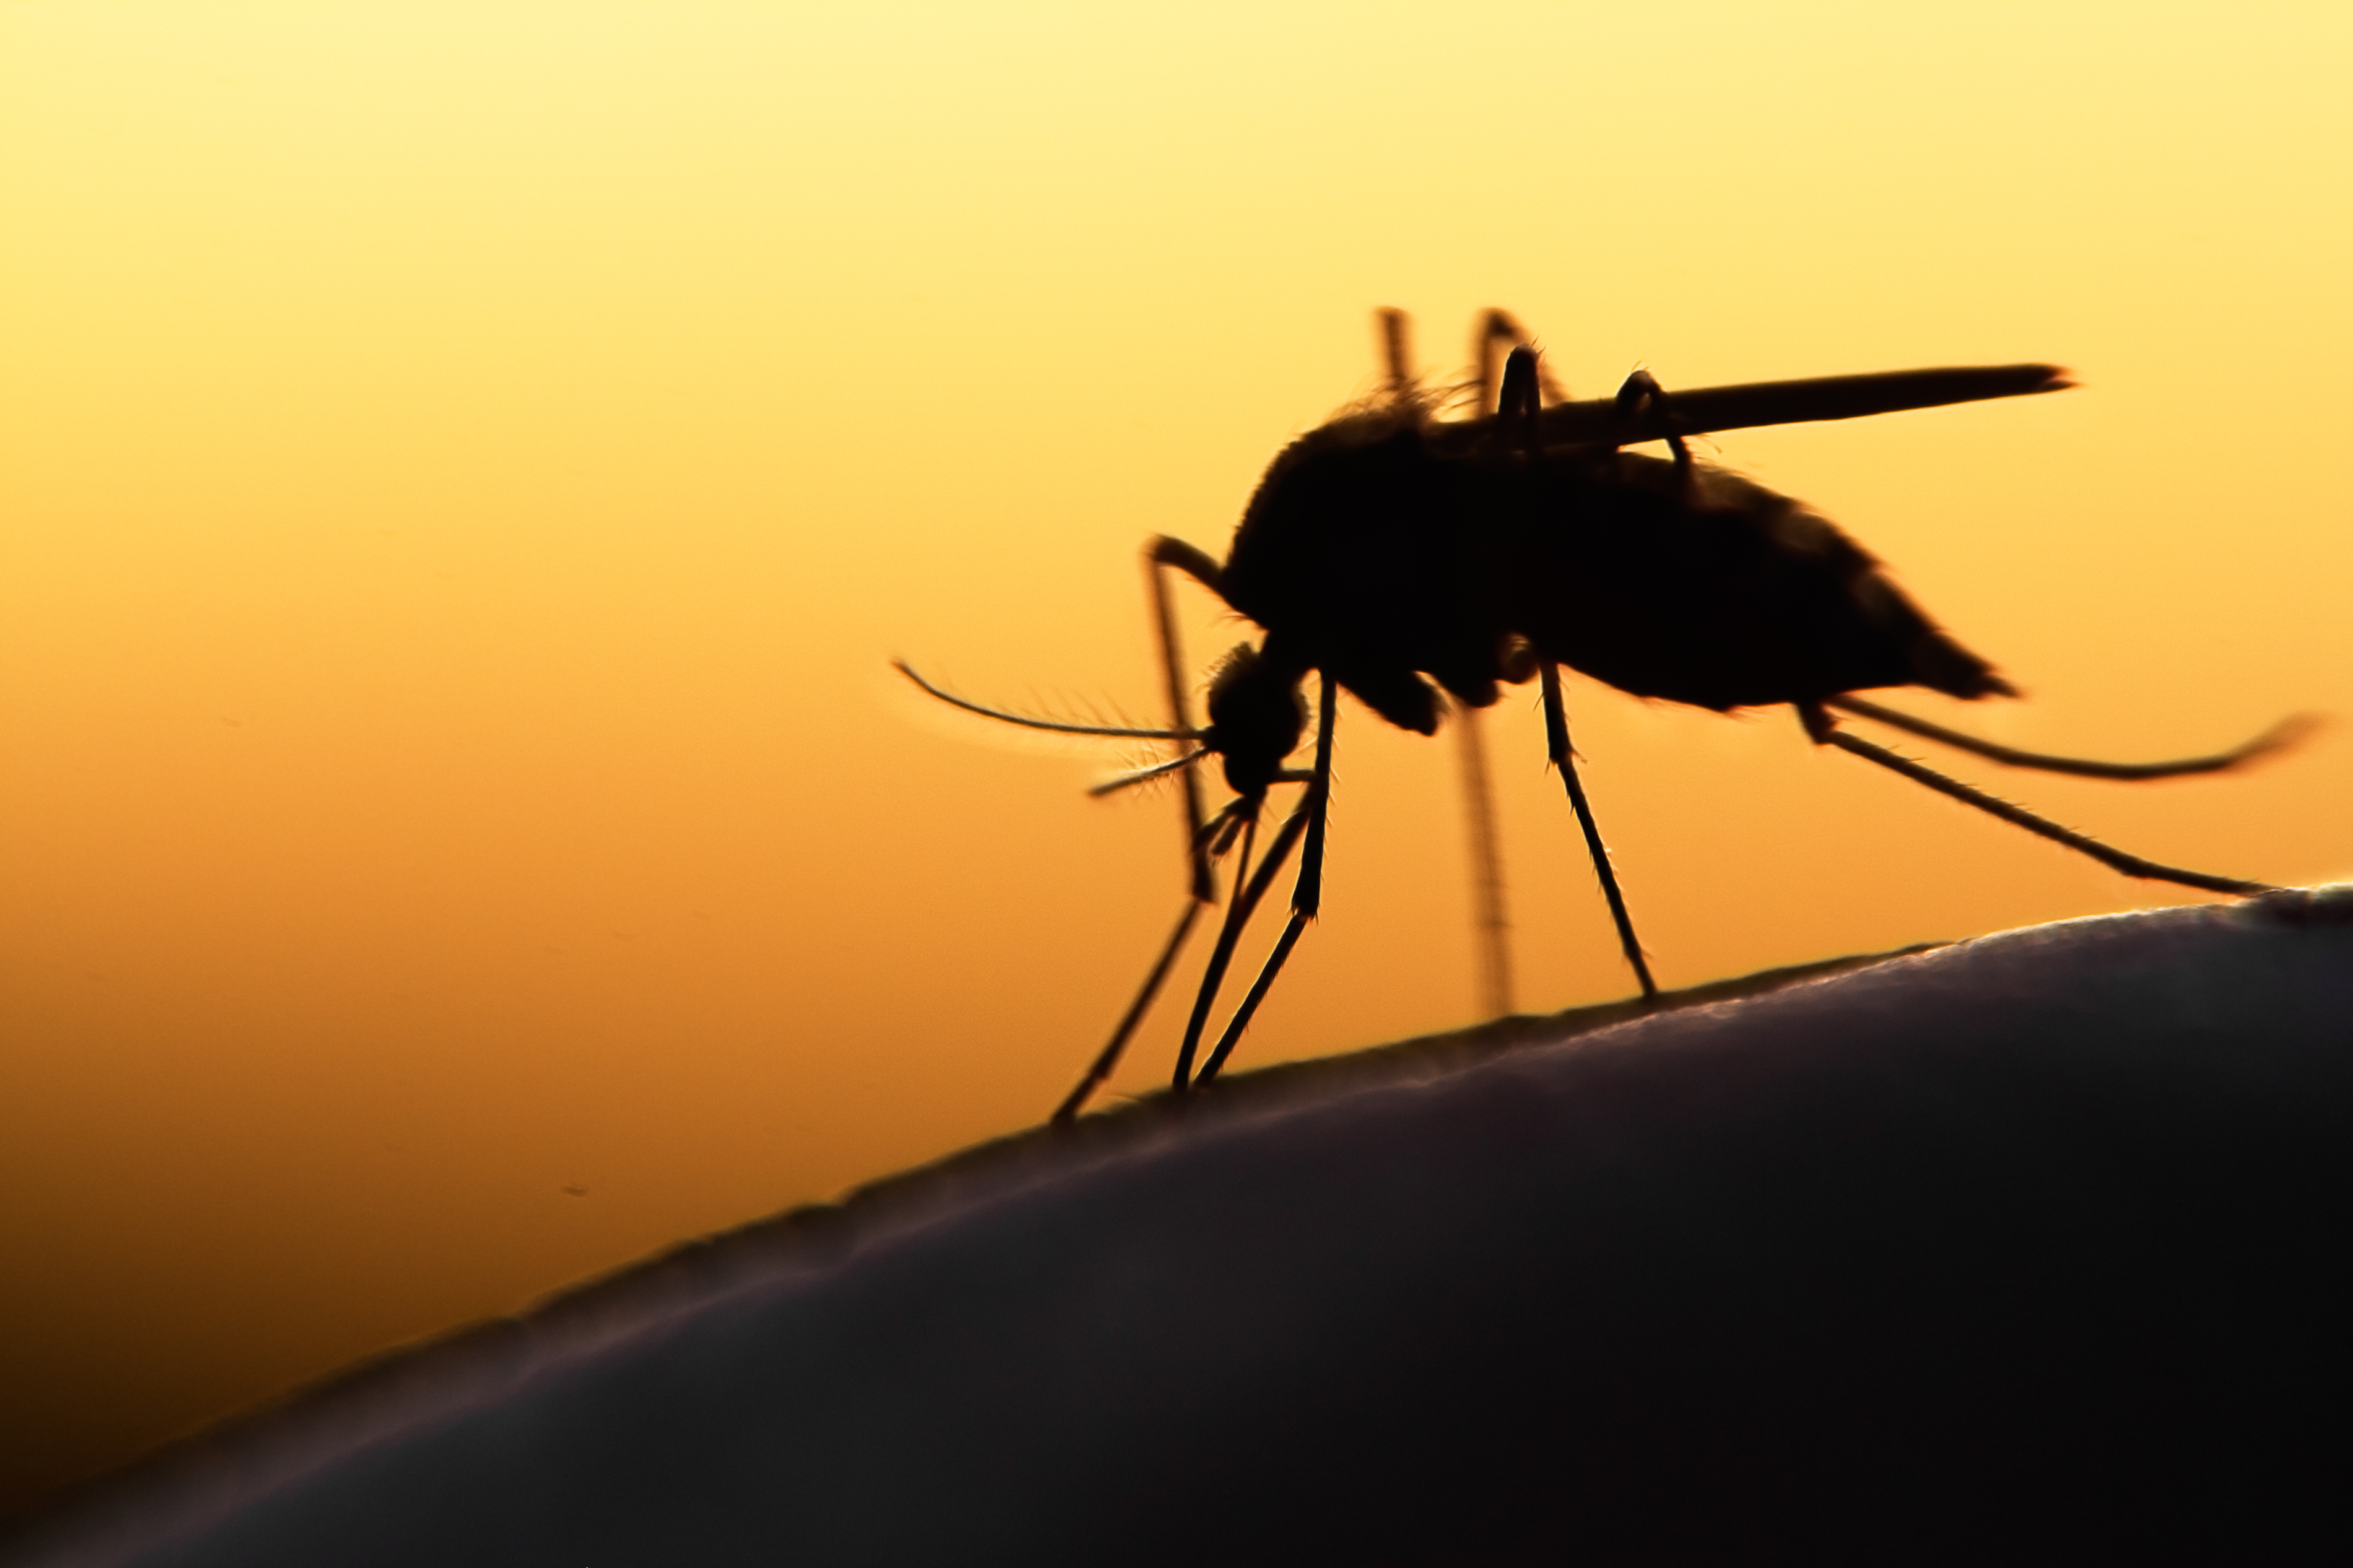 Mosquito - The Center of Biological Risks